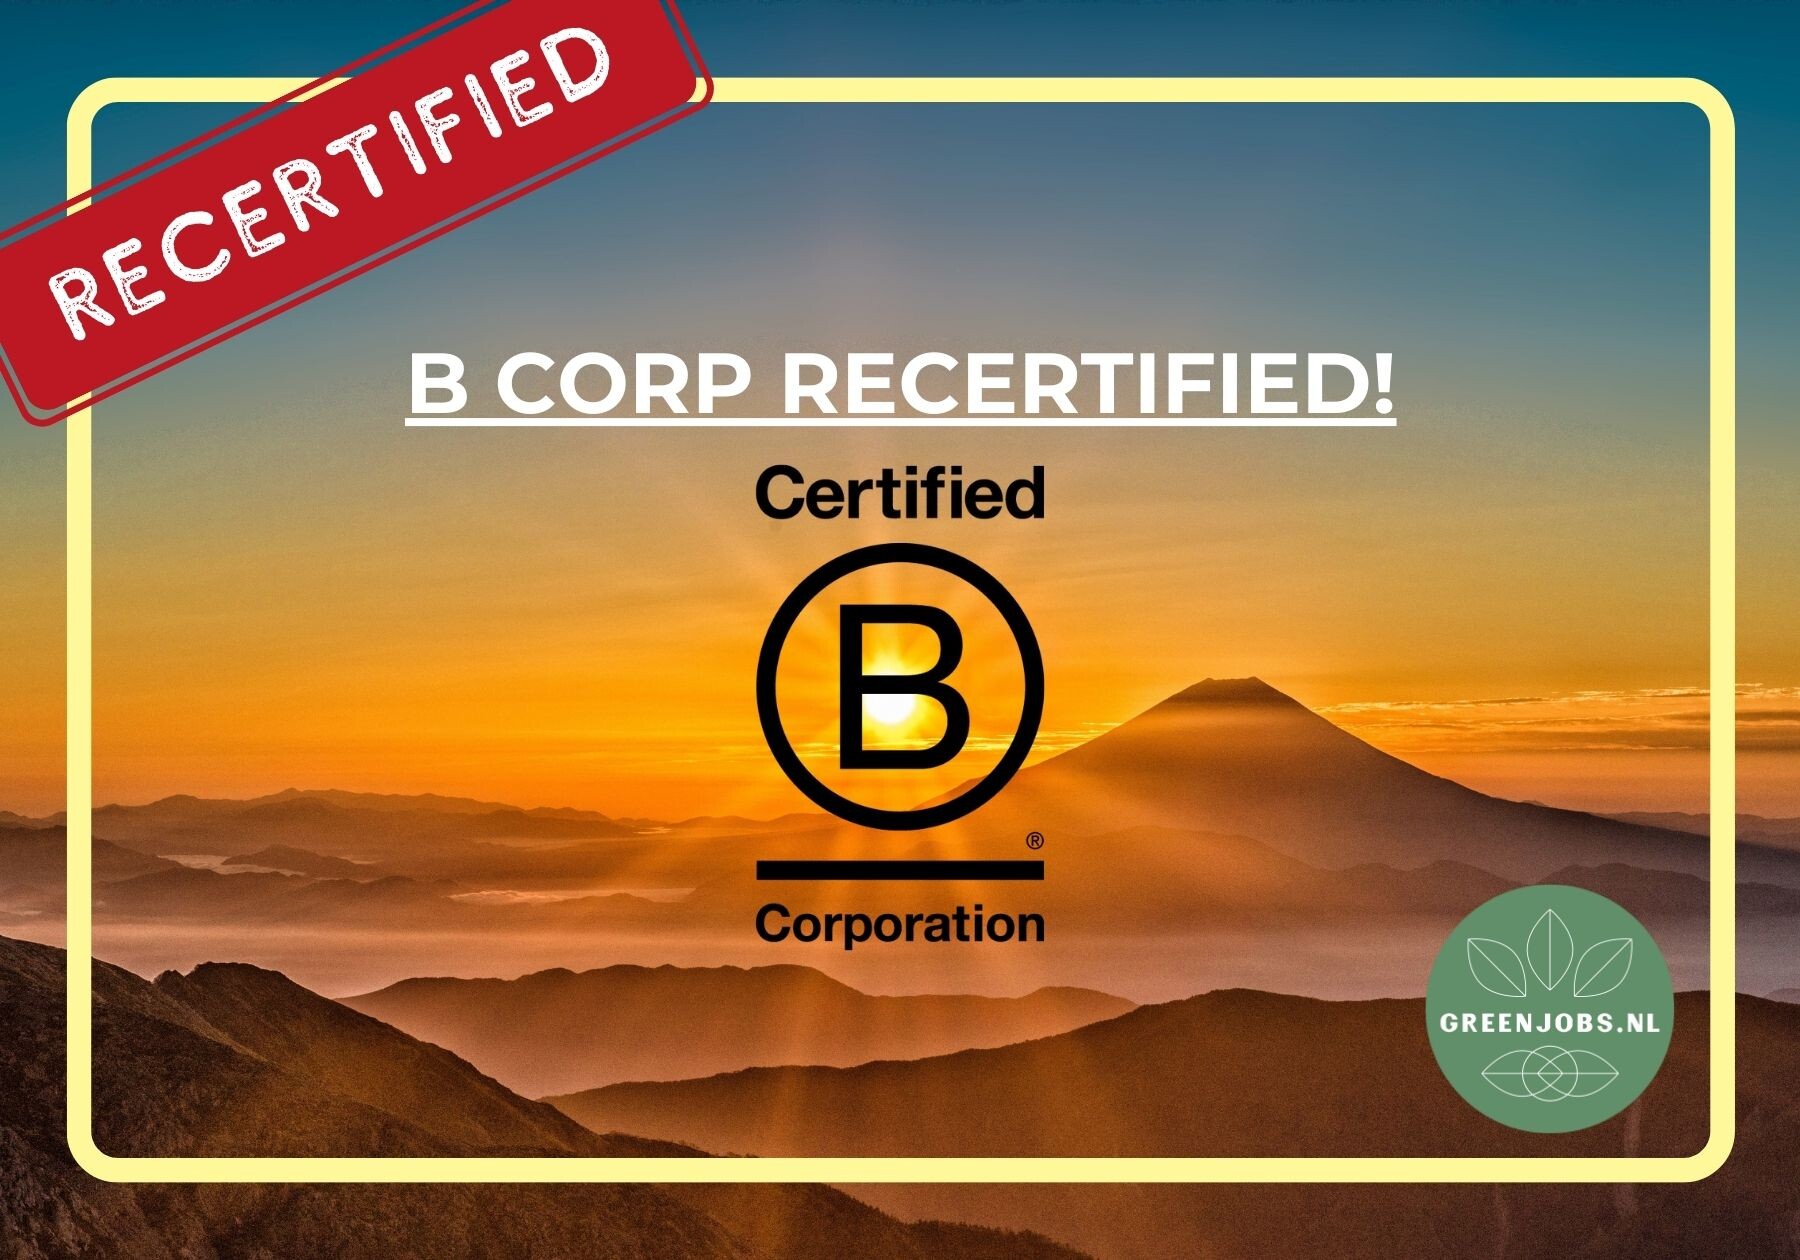 Exciting announcement: Greenjobs.nl have successfully renewed their B Corp certification!